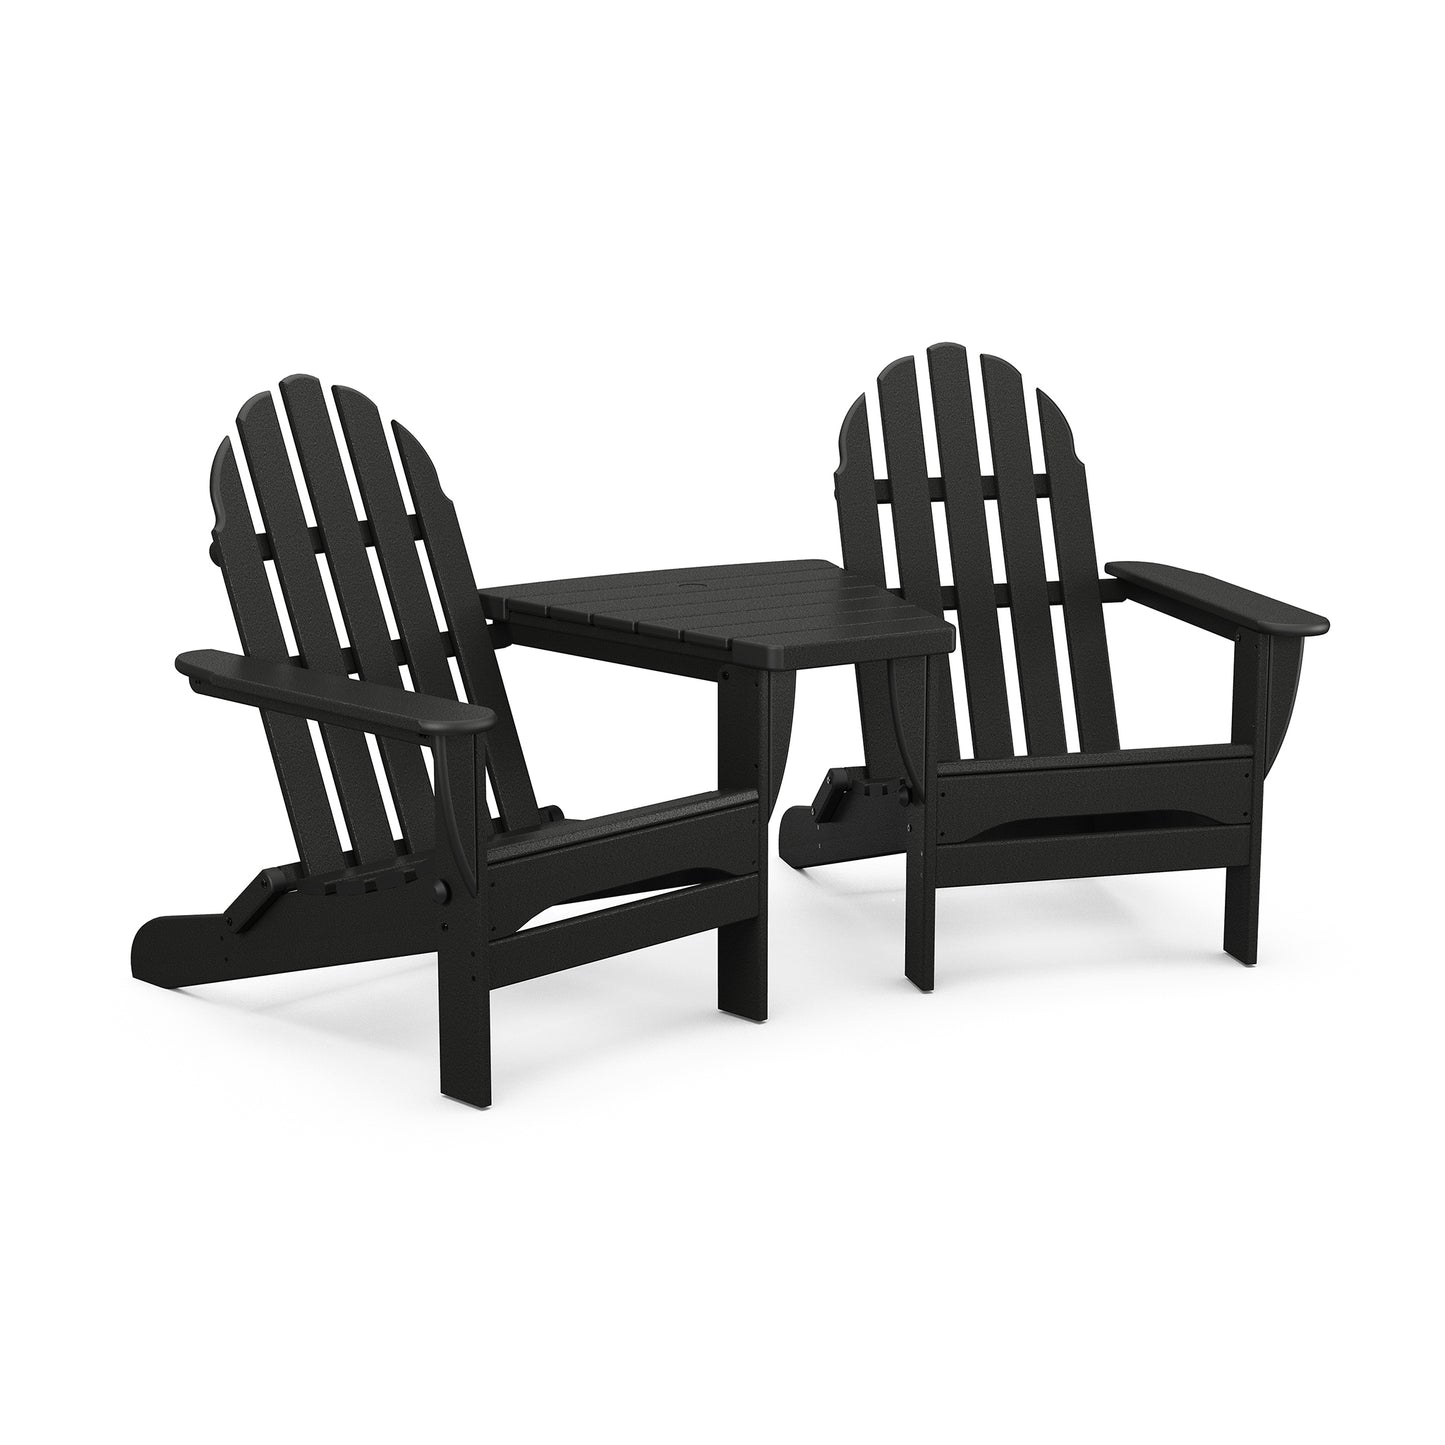 Two black POLYWOOD Classic Folding Adirondacks with Connecting Table, displayed against a white background.